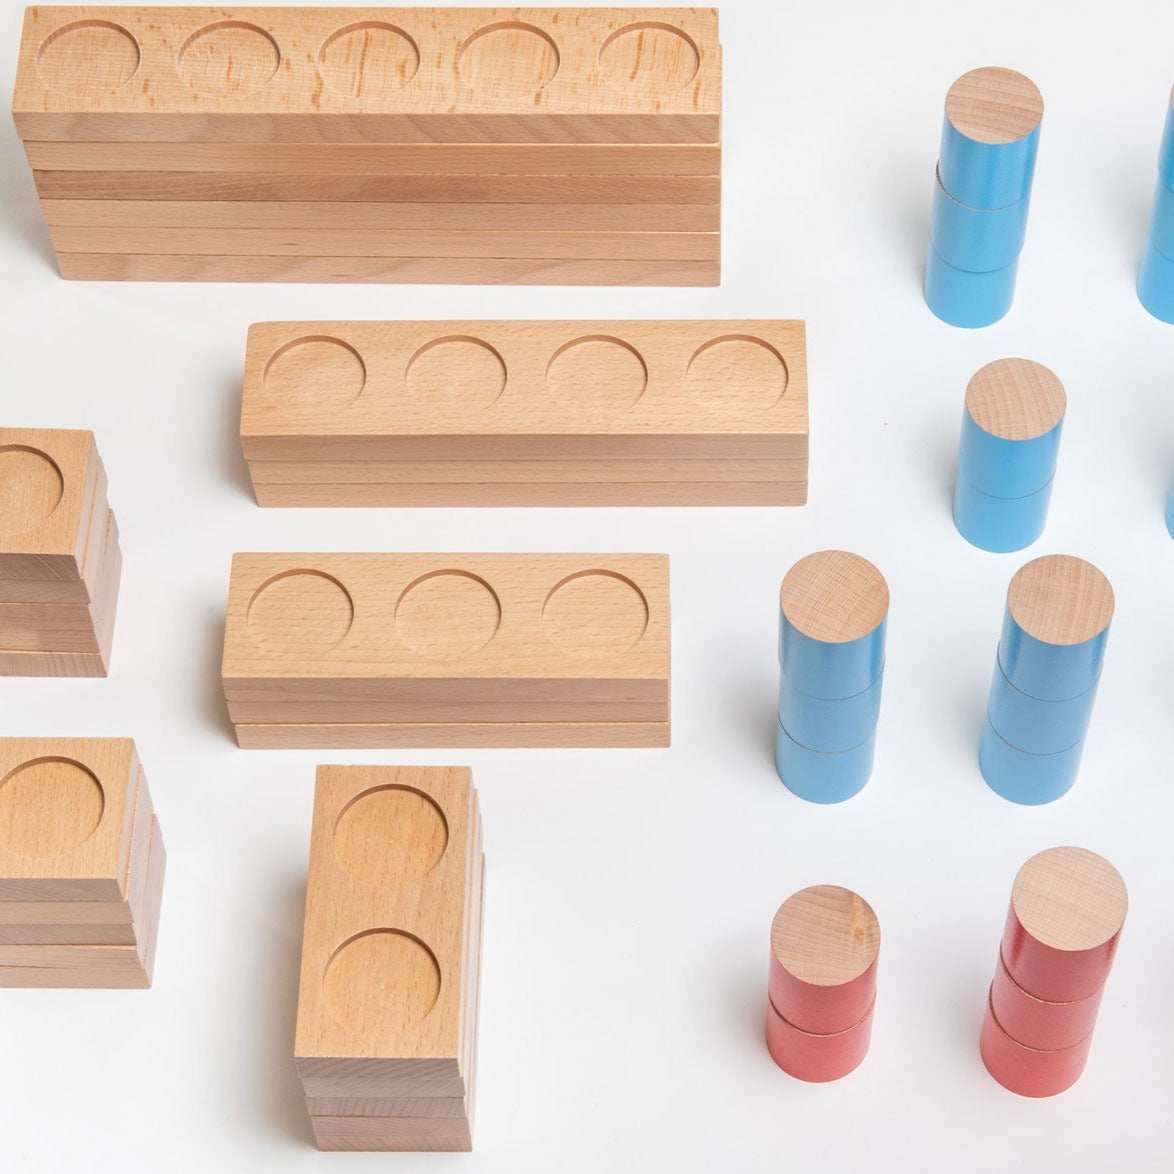 Wooden Counting Blocks, The wooden counting set is the perfect tool for early childhood mathematical education. The set includes a variety of bases that can be arranged in different ways to support learning addition, subtraction, number bonds and ten frame work. The bases can be positioned side by side, stacked on top of each other or arranged in any order to create a unique learning experience.Made from FSC® Certified Beech Wood, each piece in the set is durable and long-lasting. The set includes 40 counte